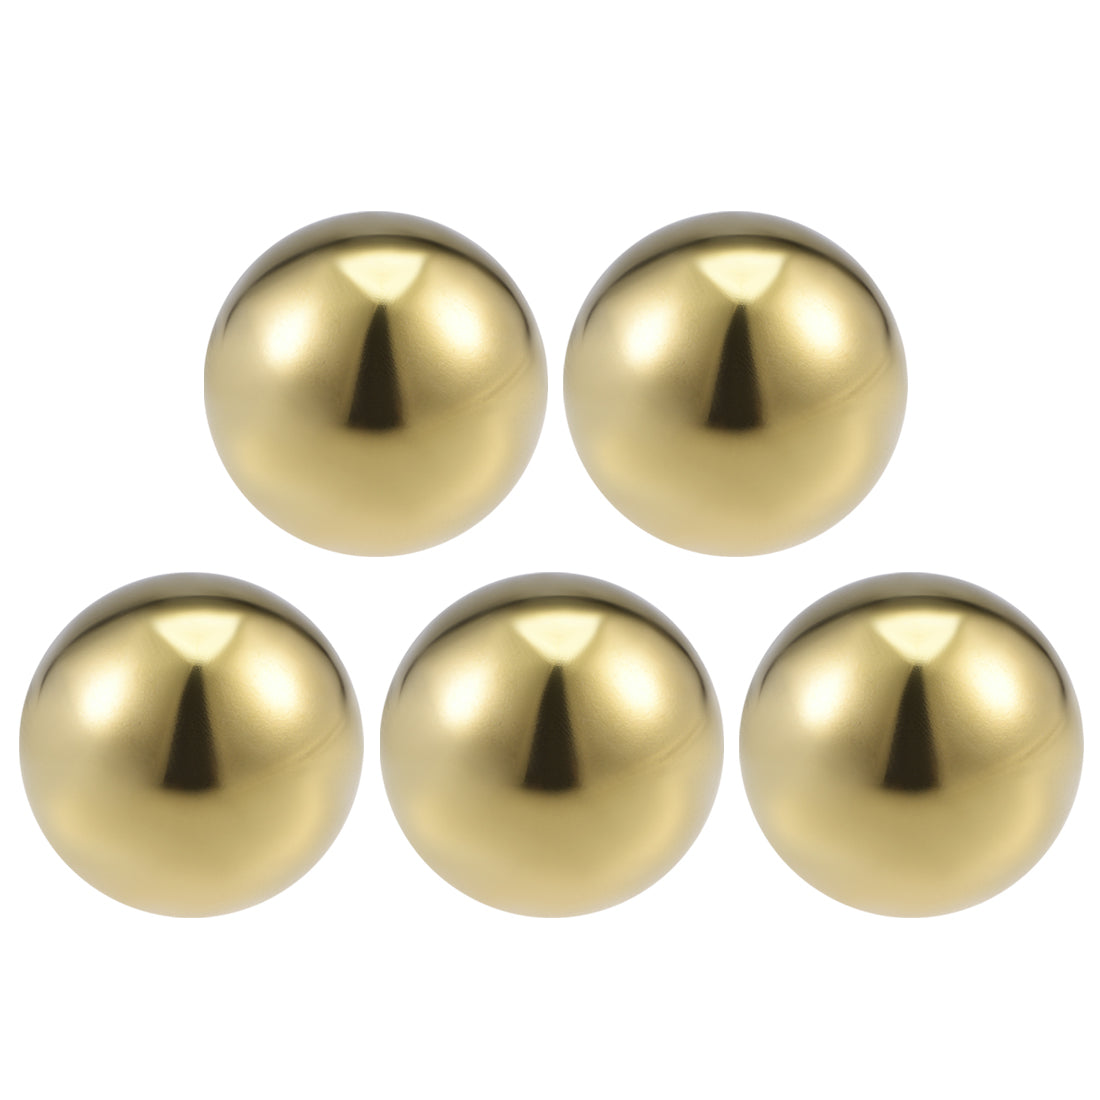 uxcell Uxcell 25mm 201 Stainless Steel Hollow Ball for Home Garden Decoration Gold Tone 5pcs